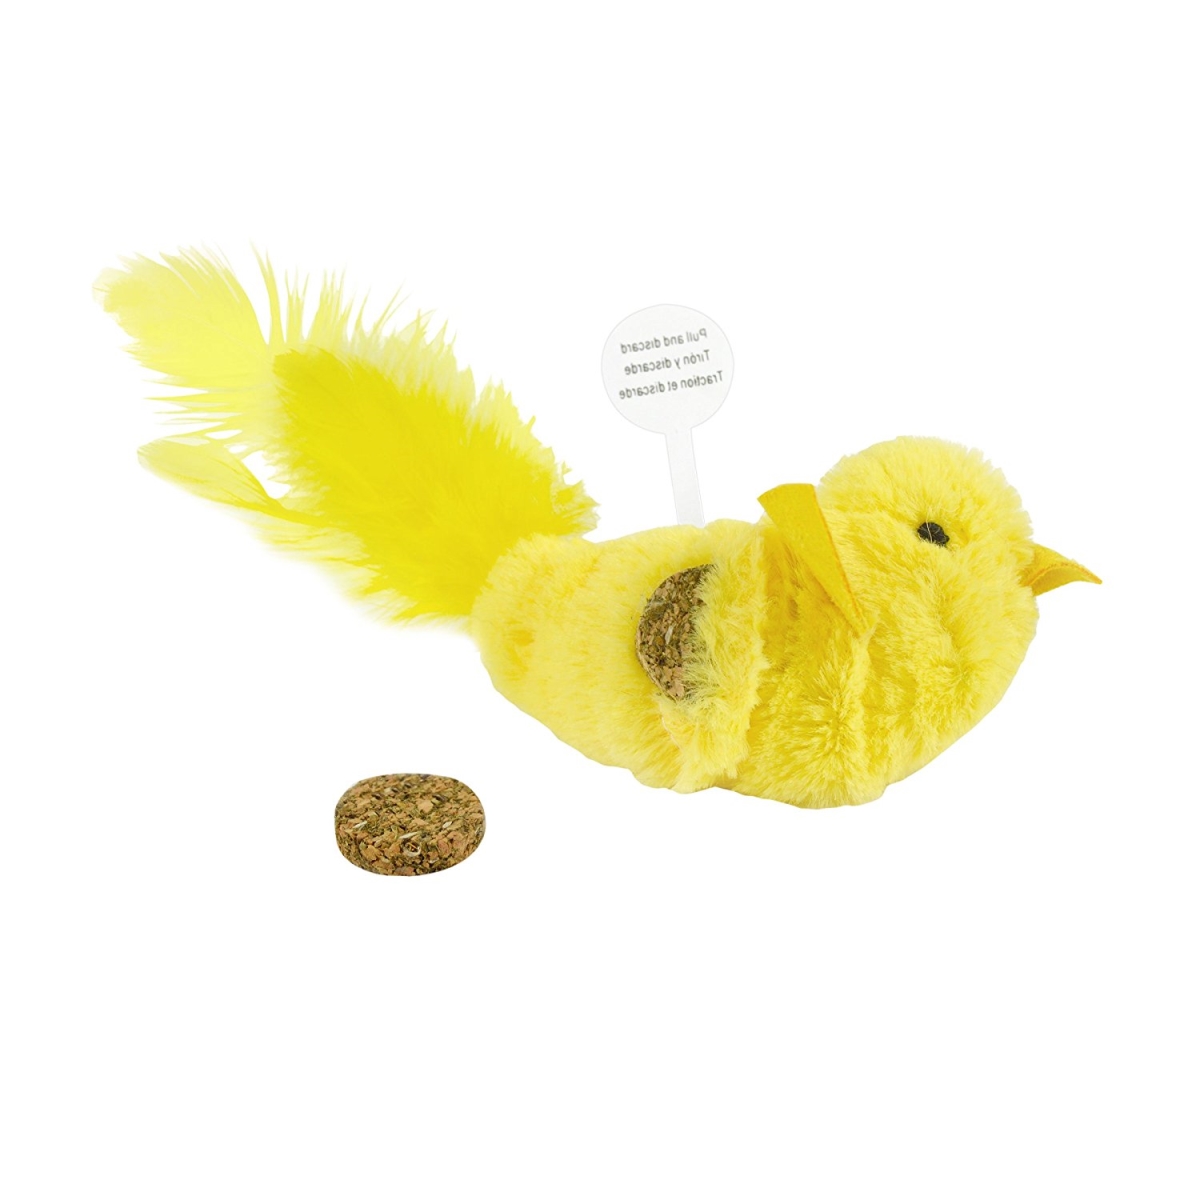 808264 Our Pets Corknip Cat Toy Yellow Fellow